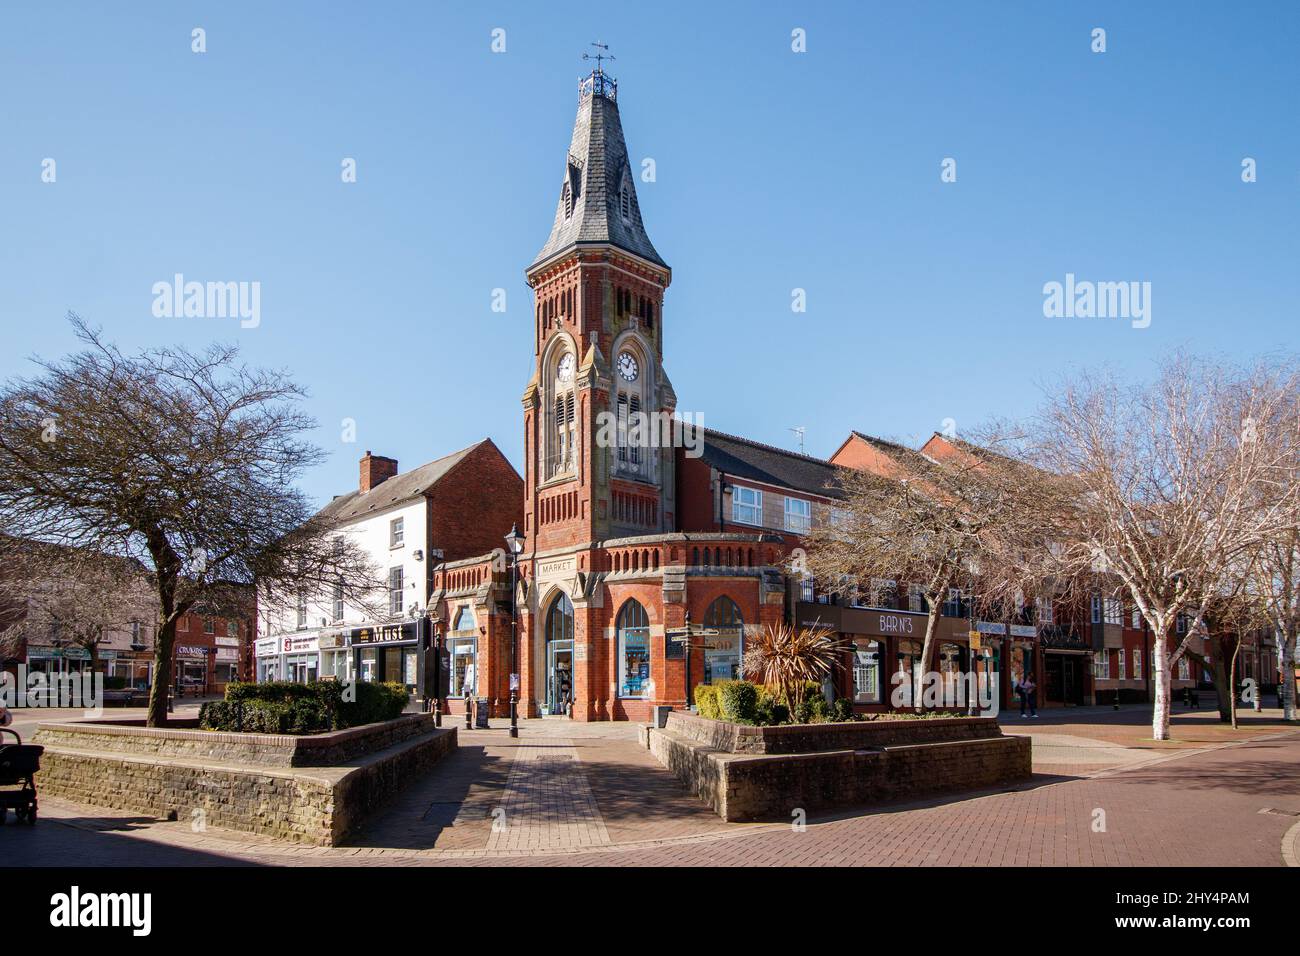 The market square in Rugeley Town Centre. Rugeley is an industrial and market town in Cannock Chase District in Staffordshire, England. It lies on the north-eastern edge of Cannock Chase next to the River Trent, 7.9 miles north of Lichfield Stock Photo